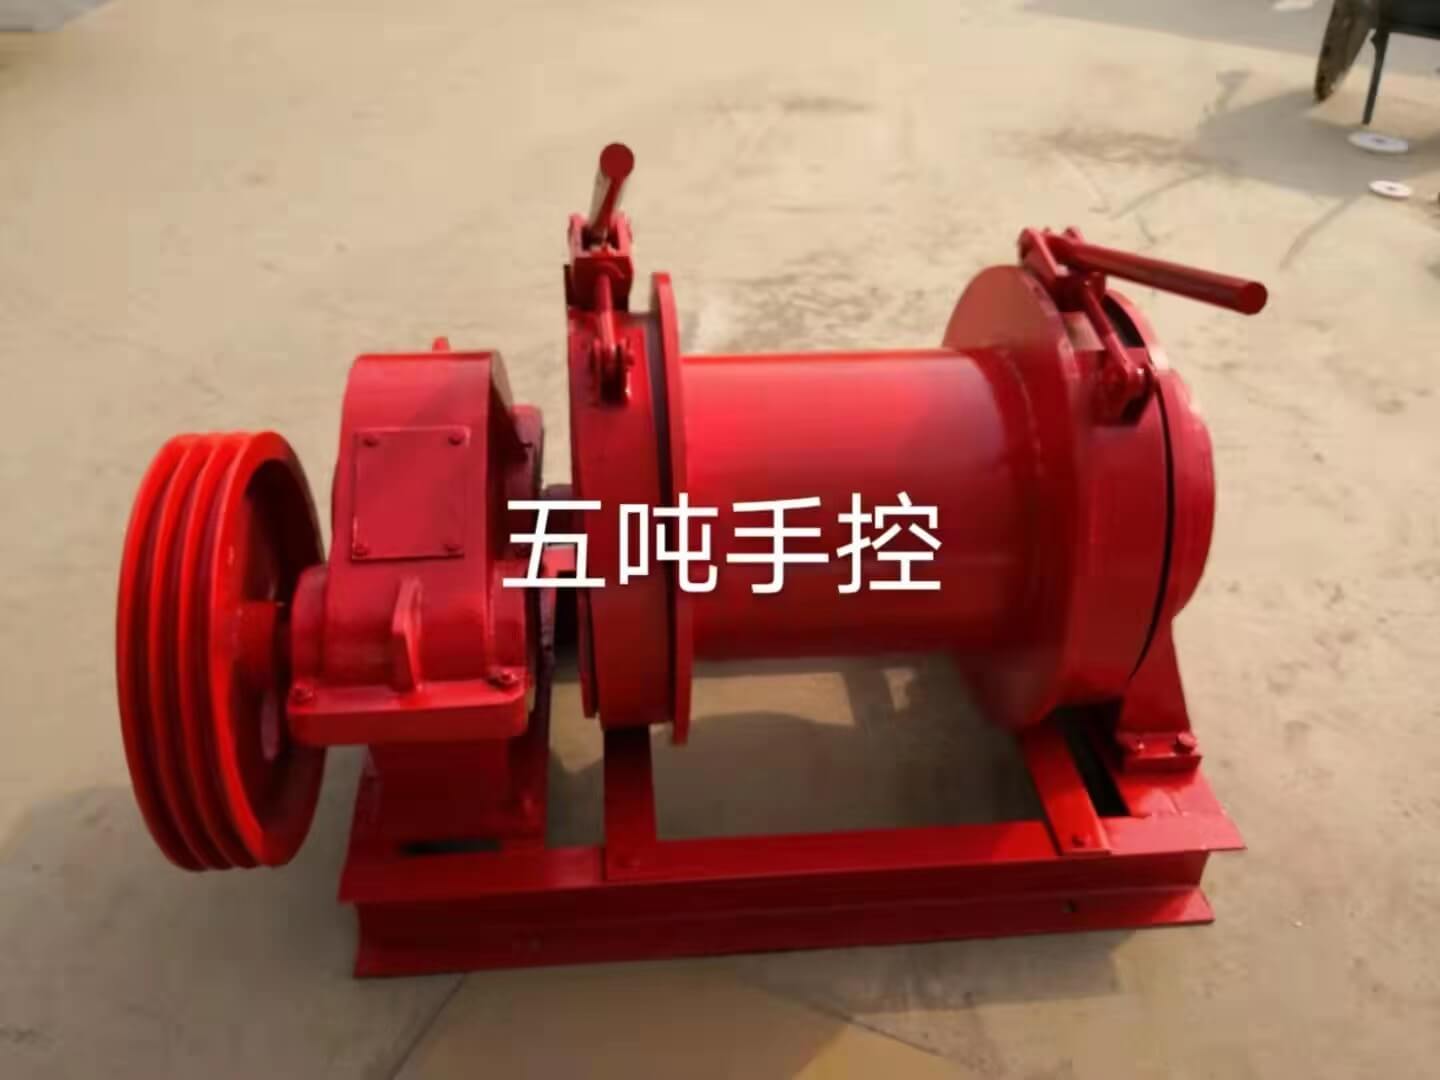 Engine driven winch for anchor (Option 2)_6.jpg